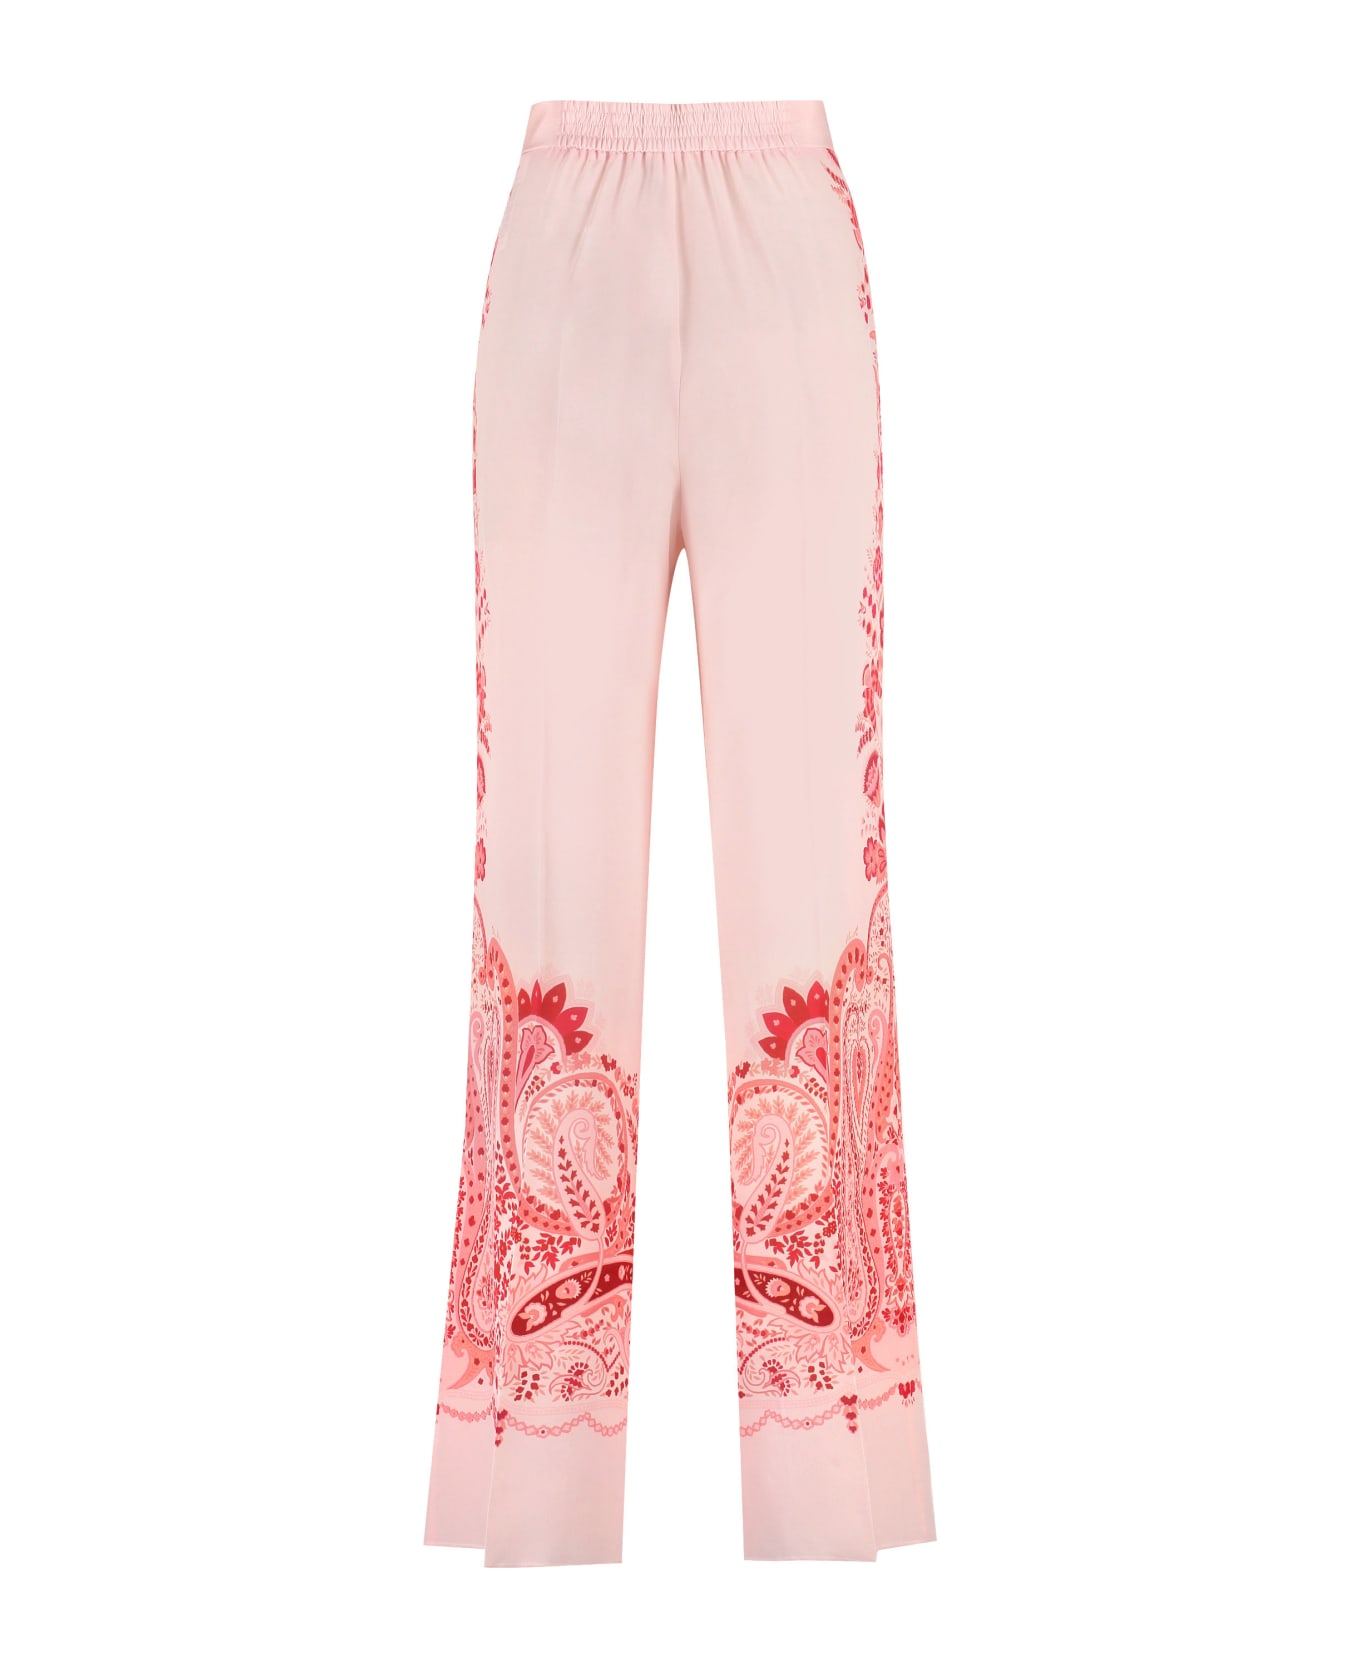 Etro Printed Silk Pants - Rosa/rosso